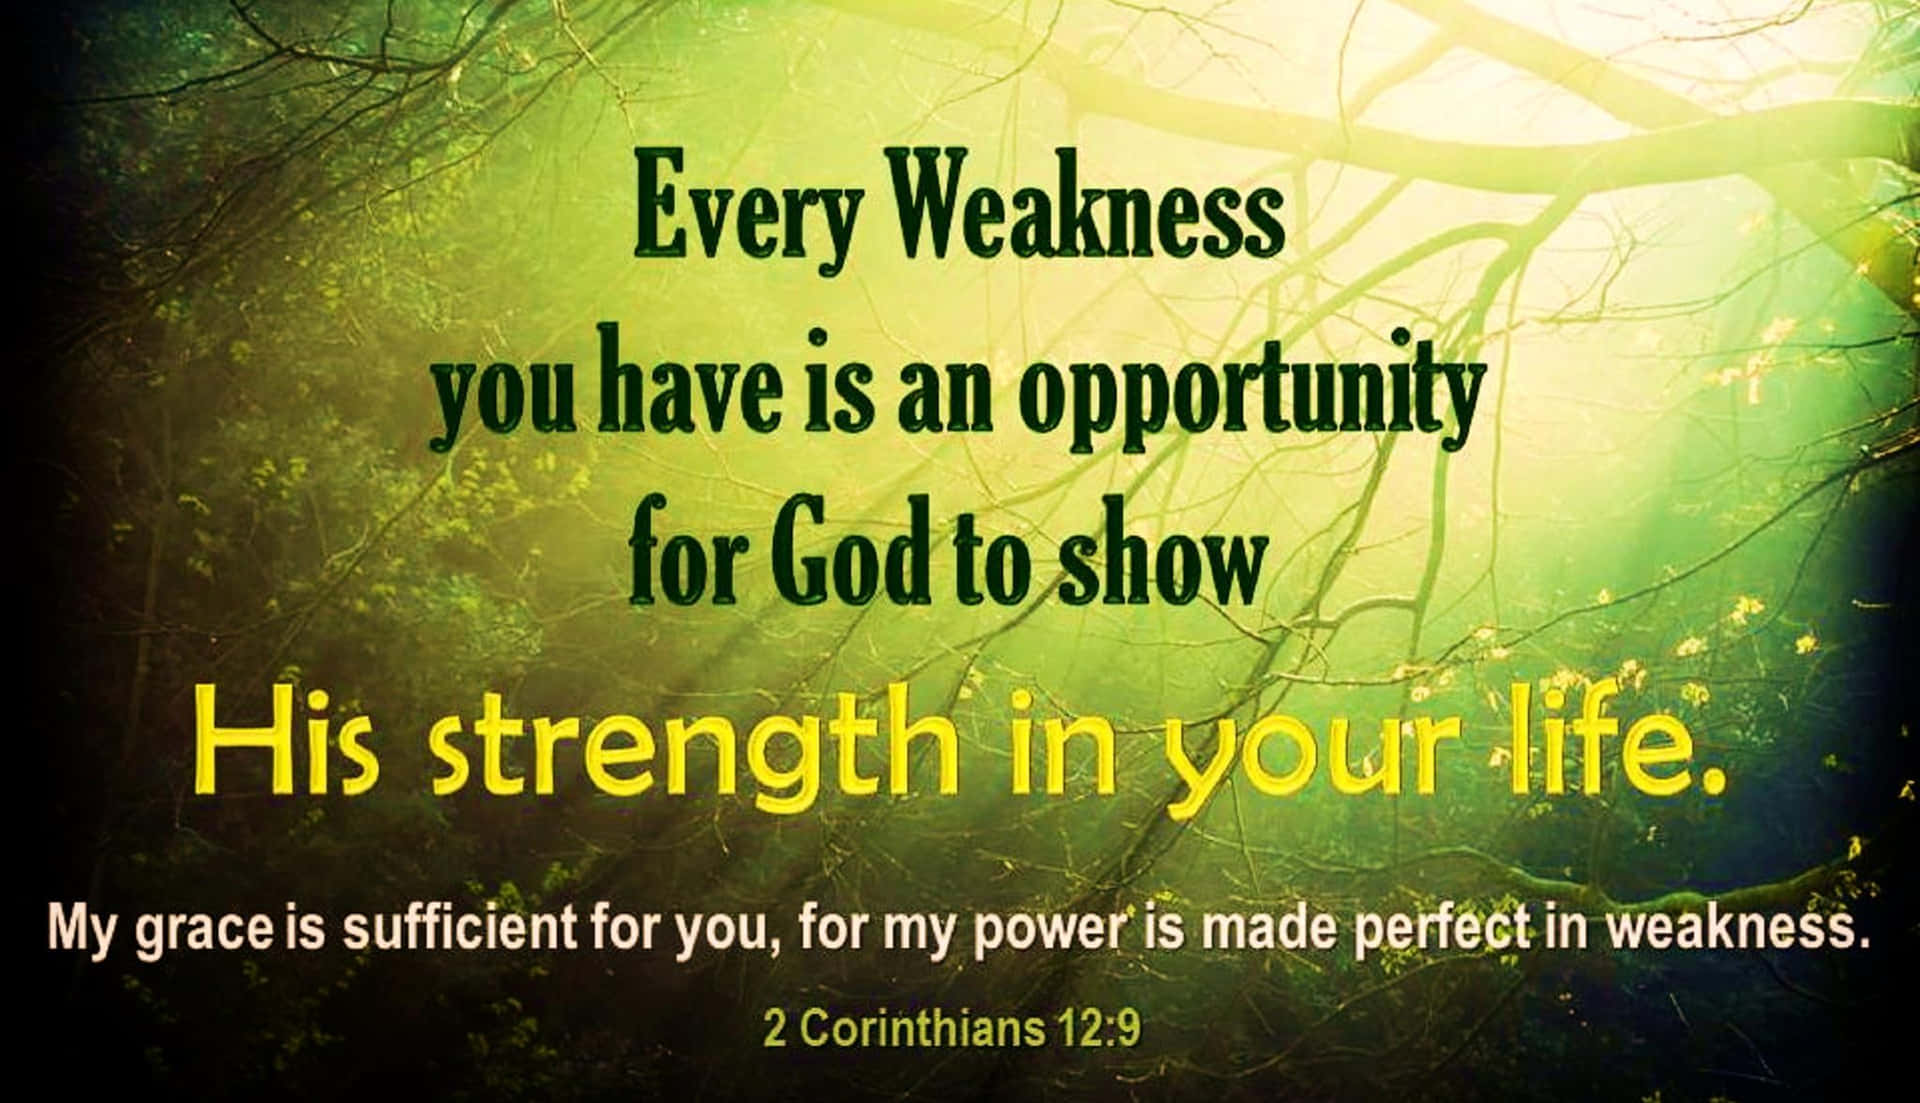 Every Weakness You Have An Opportunity For God To Show His Strength In Your Life